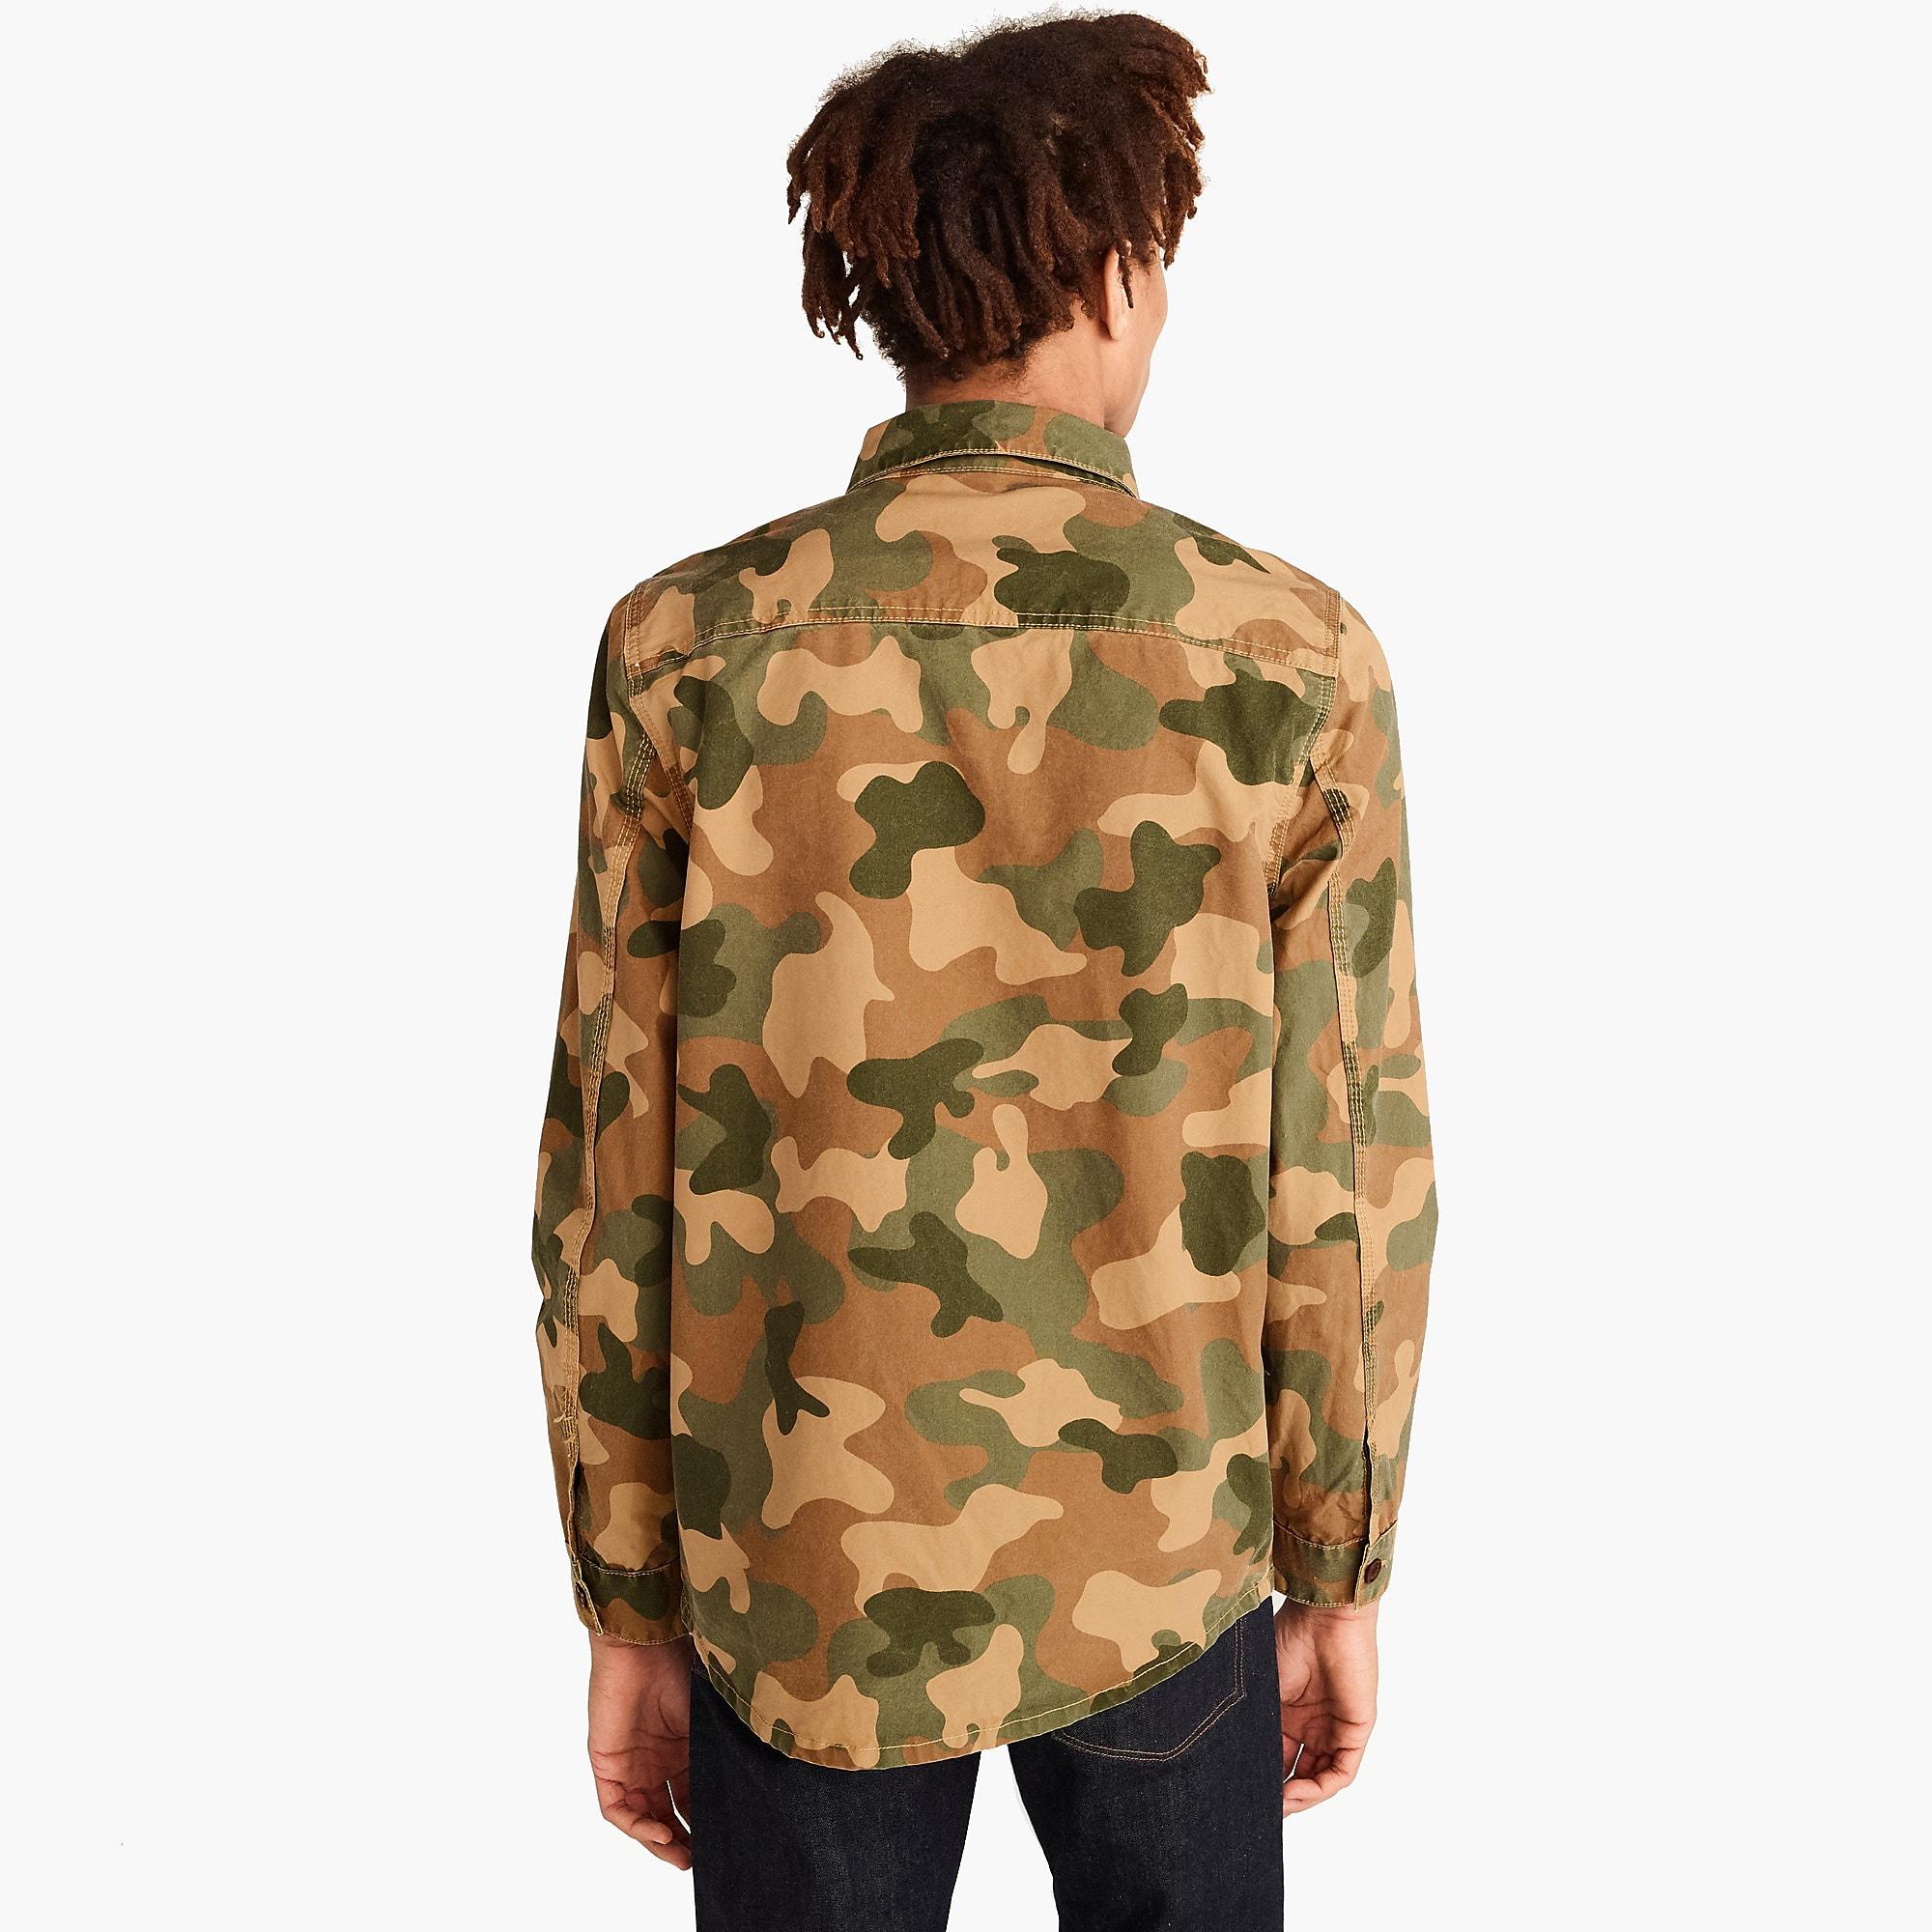 Barbour Cotton Camo Shirt Jacket in Green for Men - Lyst